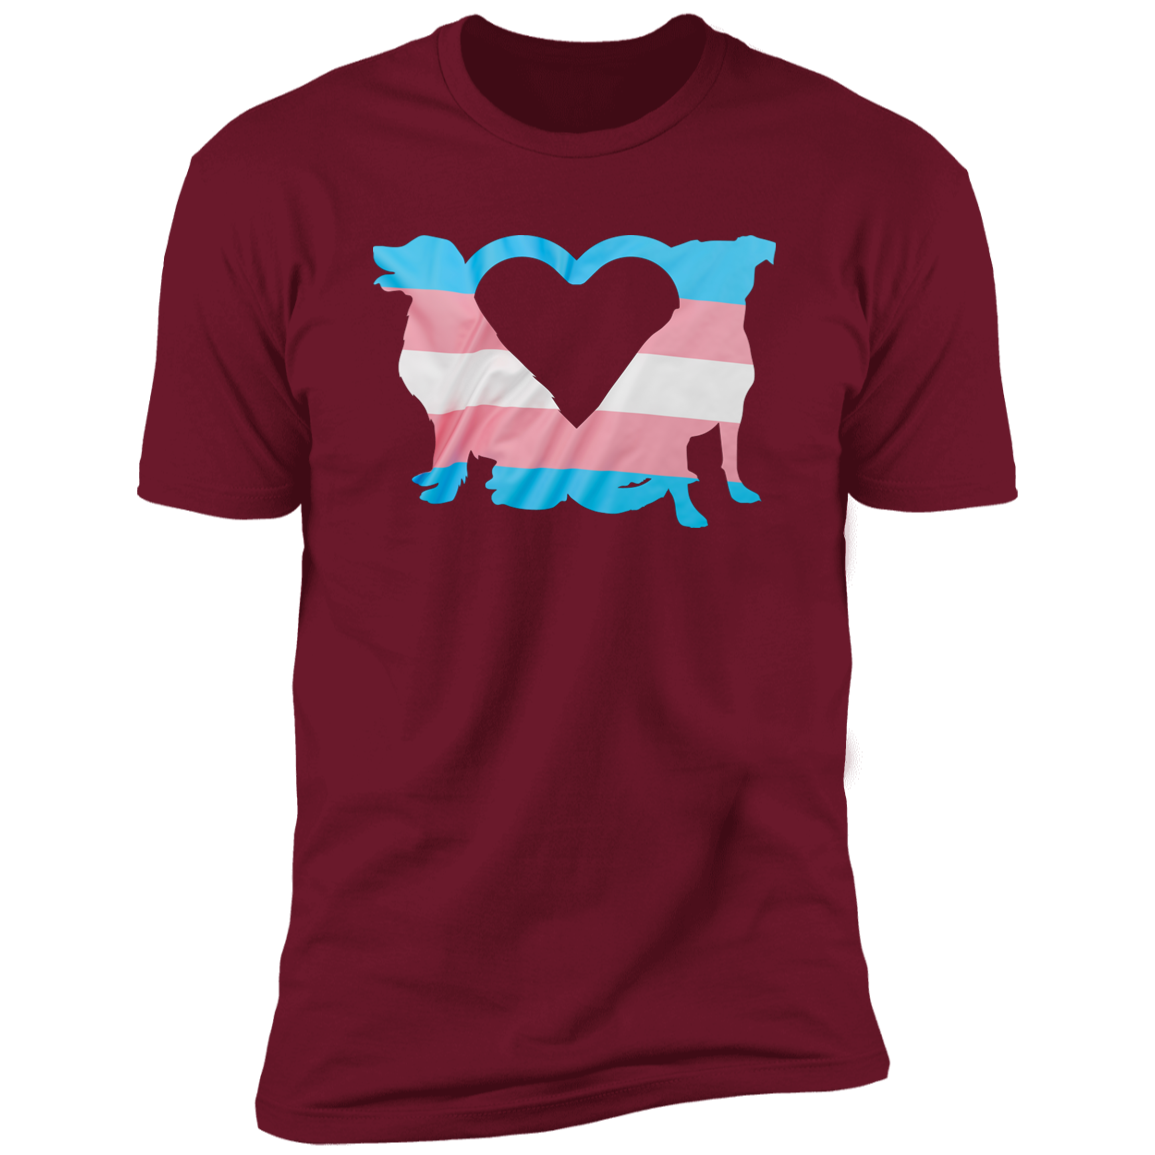 Trans Pride Dogs Heart Pride T-shirt, Trans Pride Dog Shirt for humans, in cardinal red